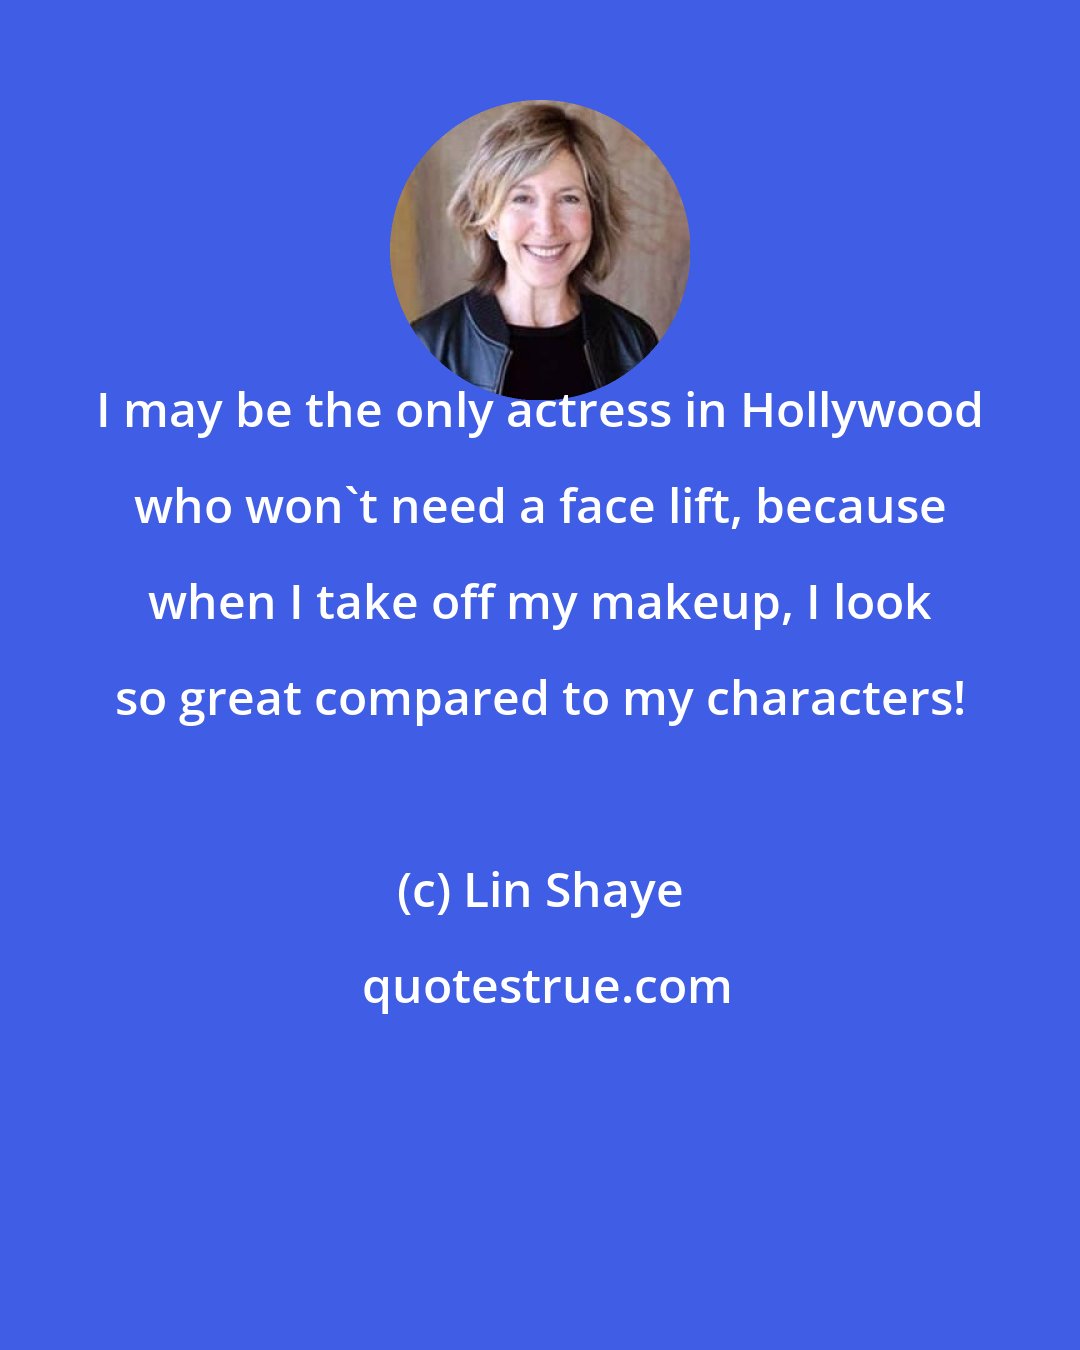 Lin Shaye: I may be the only actress in Hollywood who won't need a face lift, because when I take off my makeup, I look so great compared to my characters!